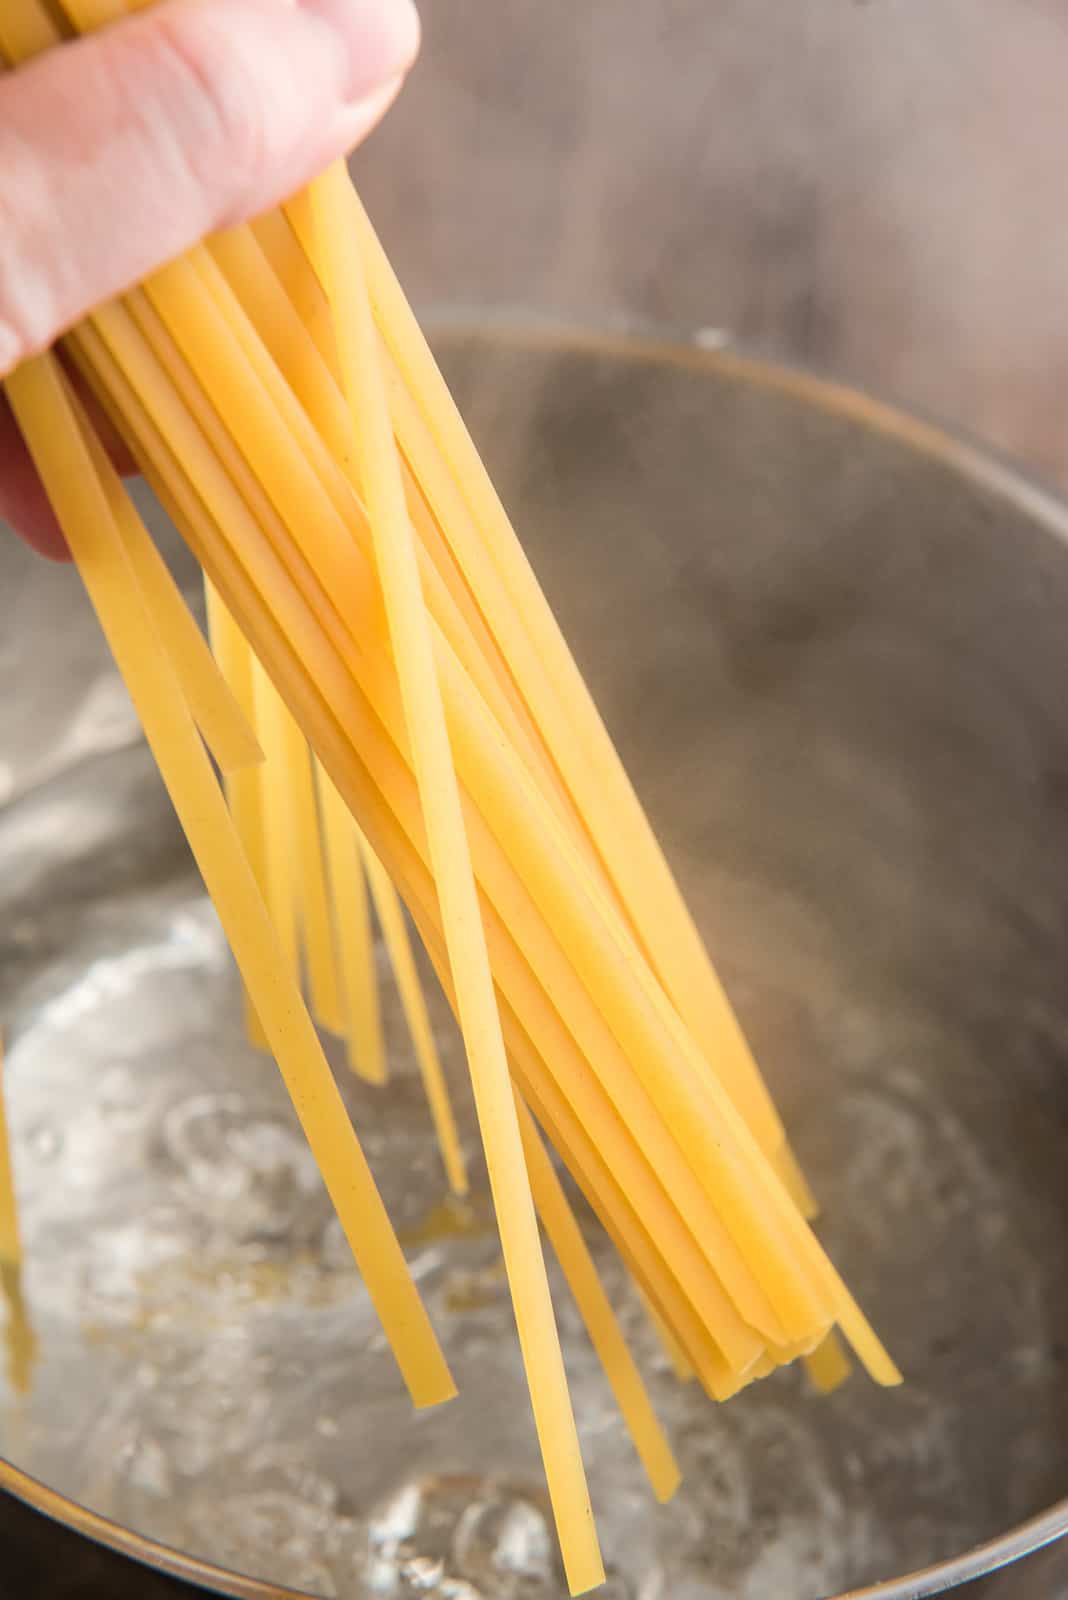 Pasta being placed in water to cook.